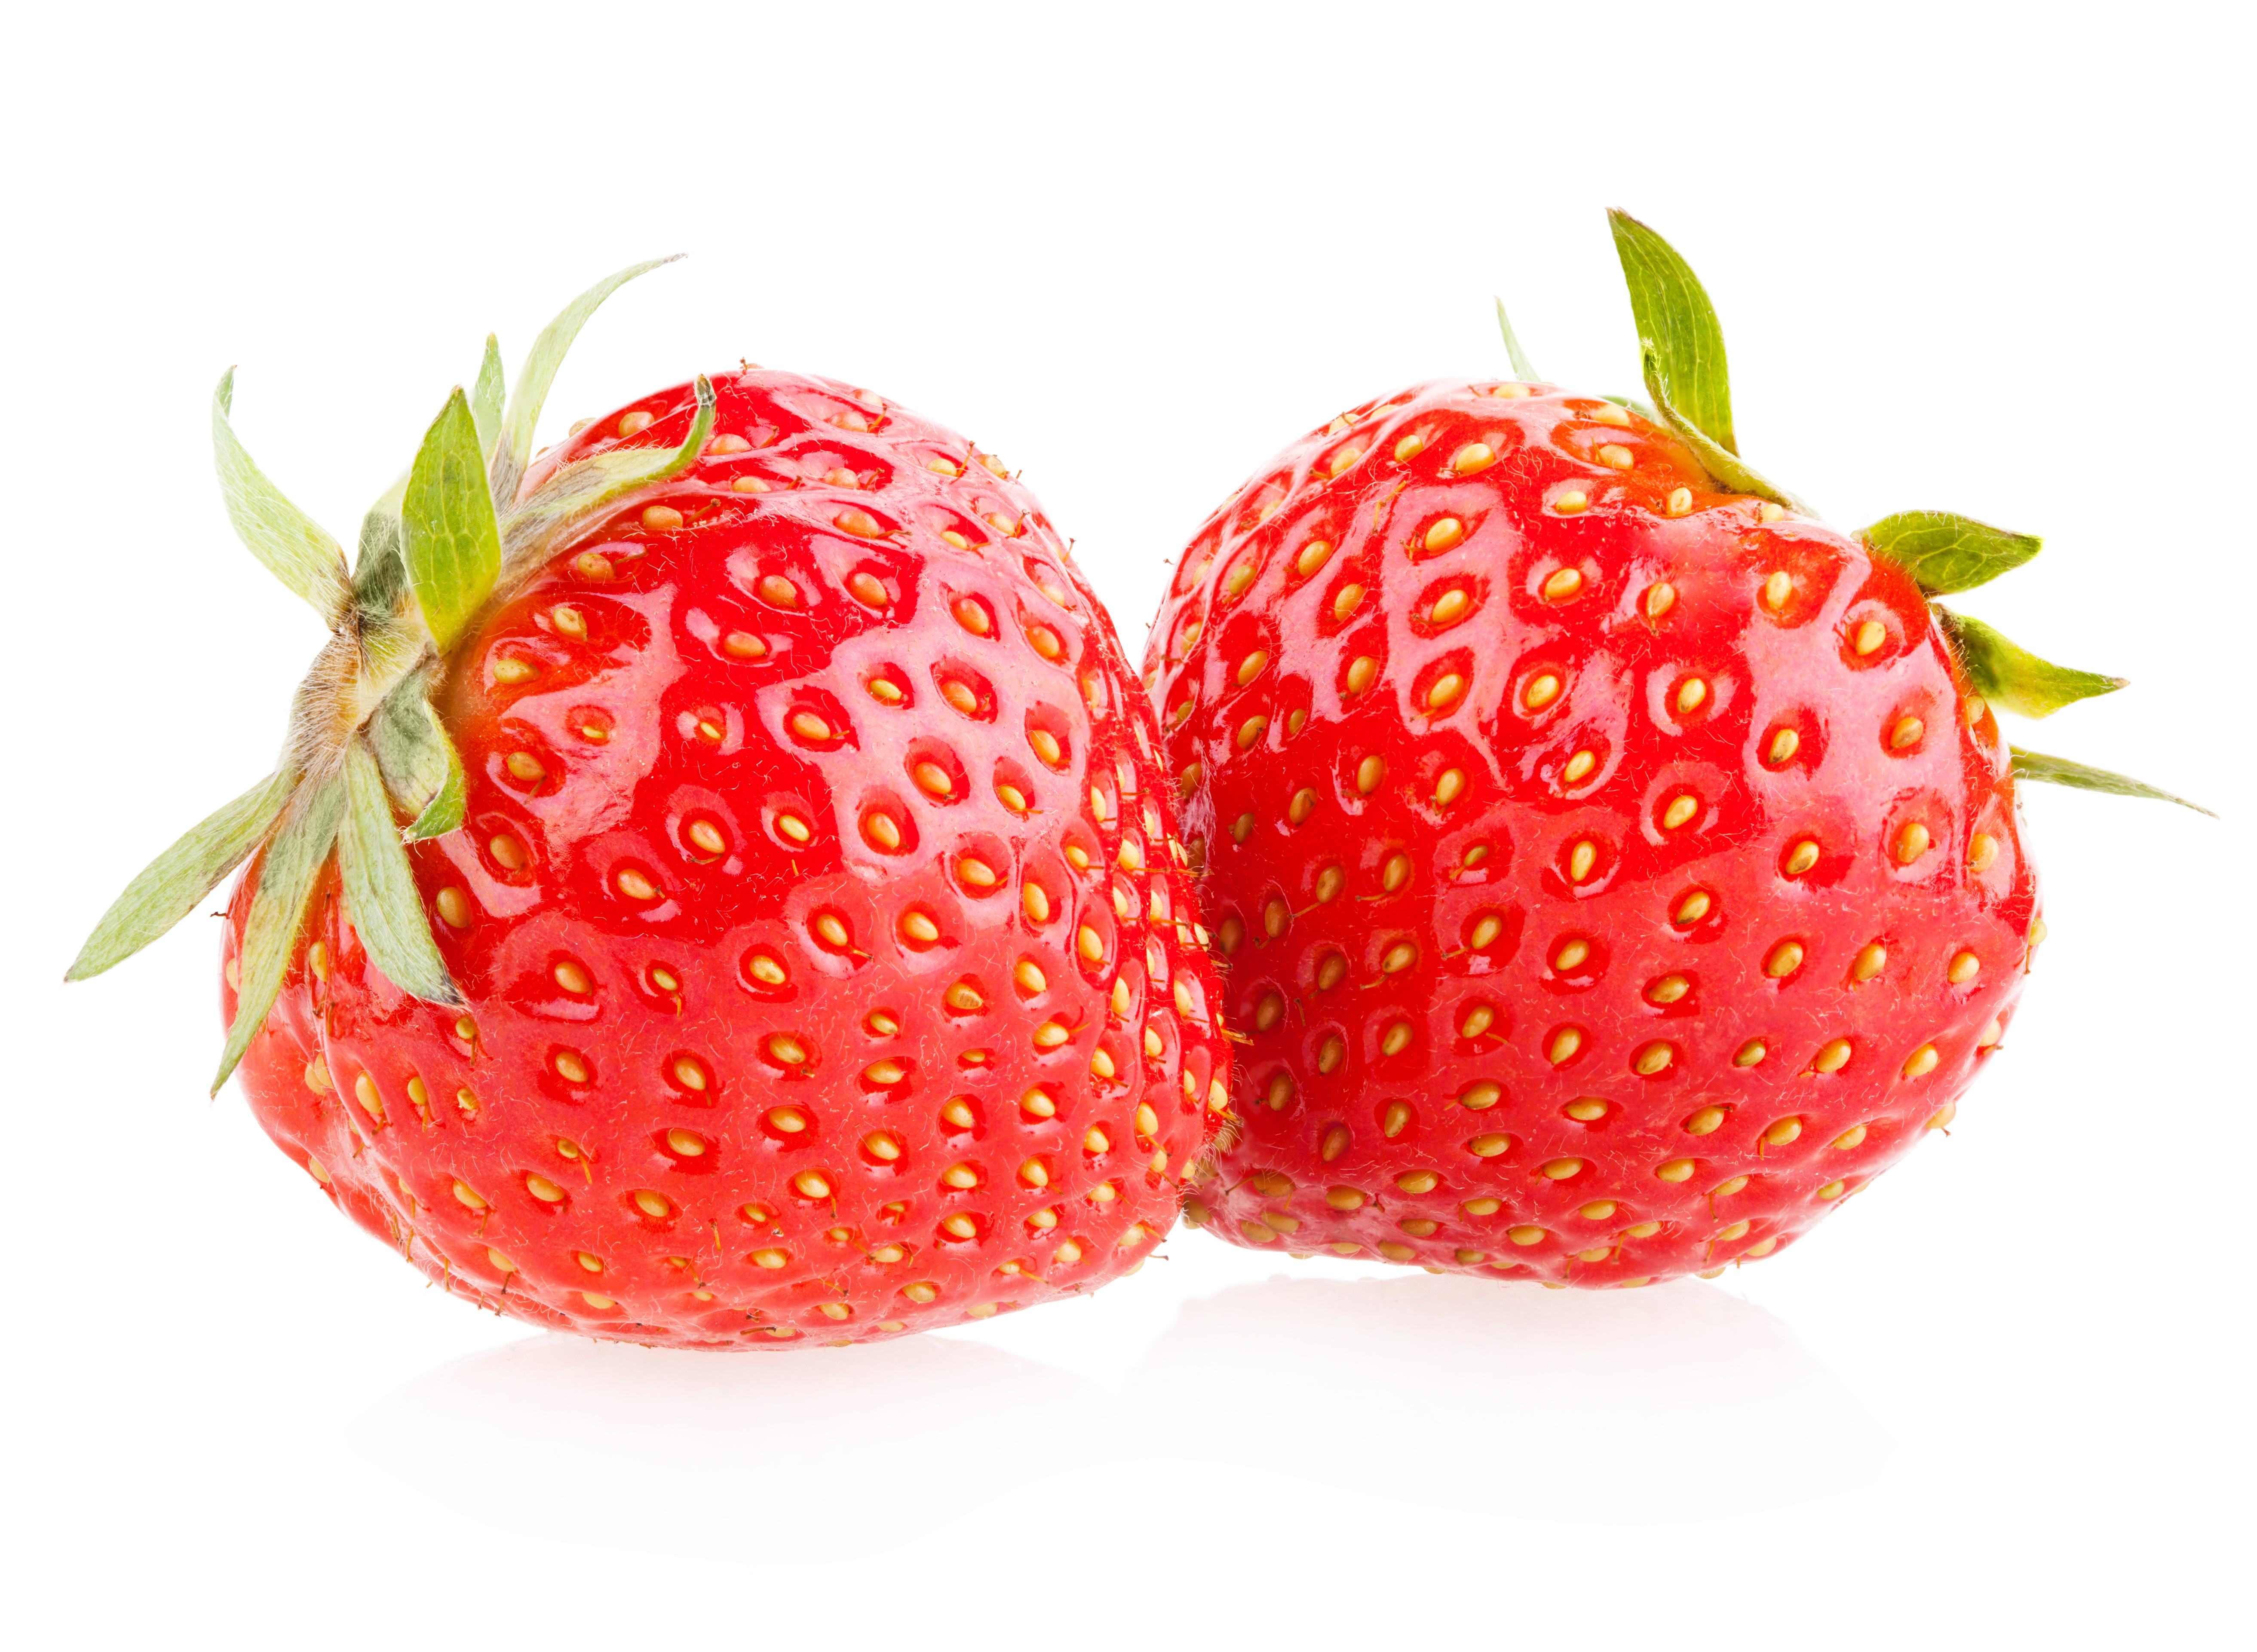 Delicious red strawberry